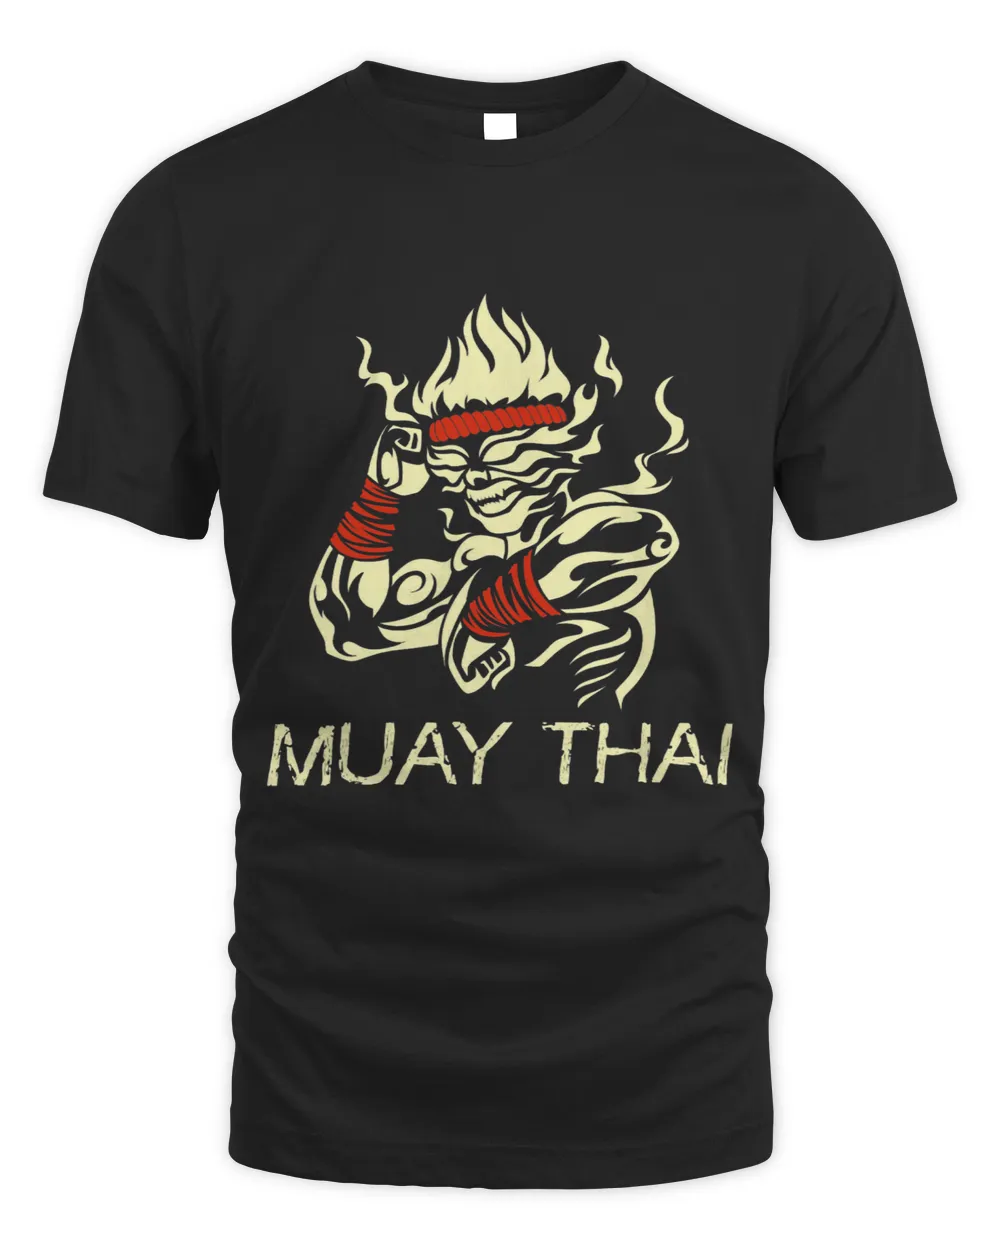 Muay Thai Fighter Thai Boxing and Kickboxing Gift